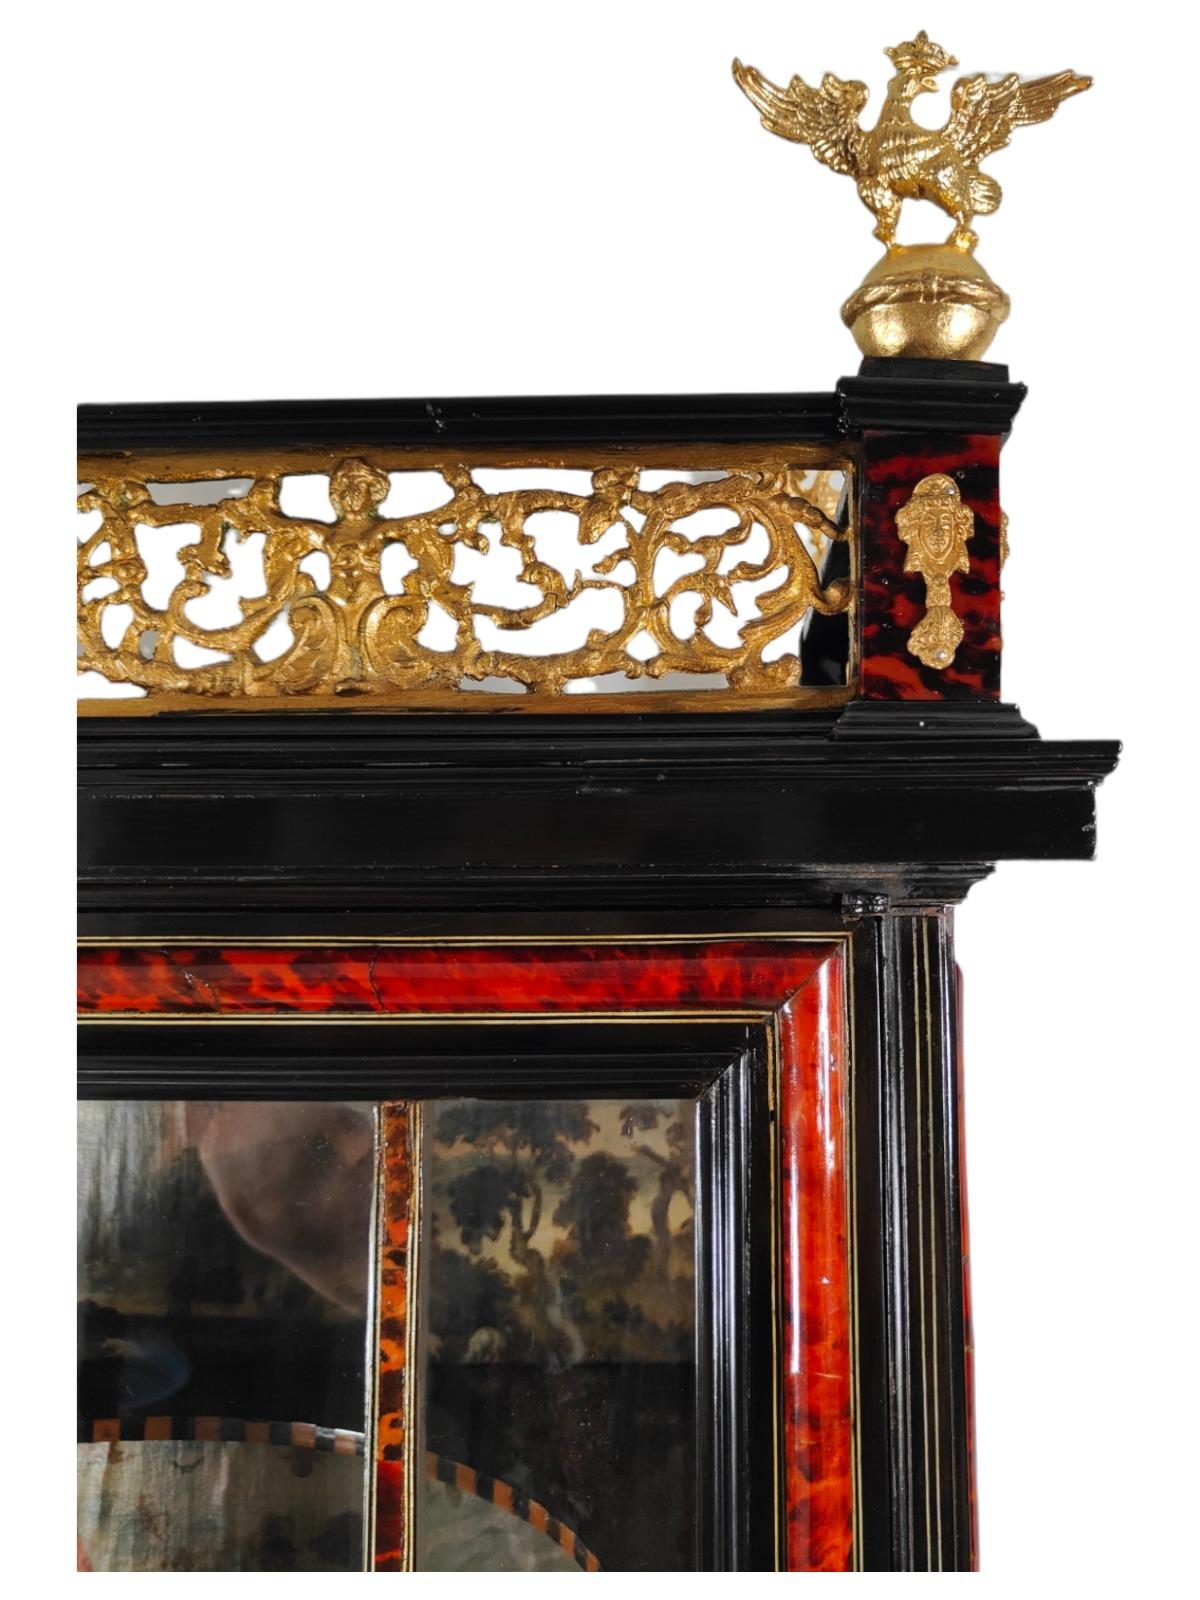 Hand-Crafted Important 17th Century Display/ Vitrine